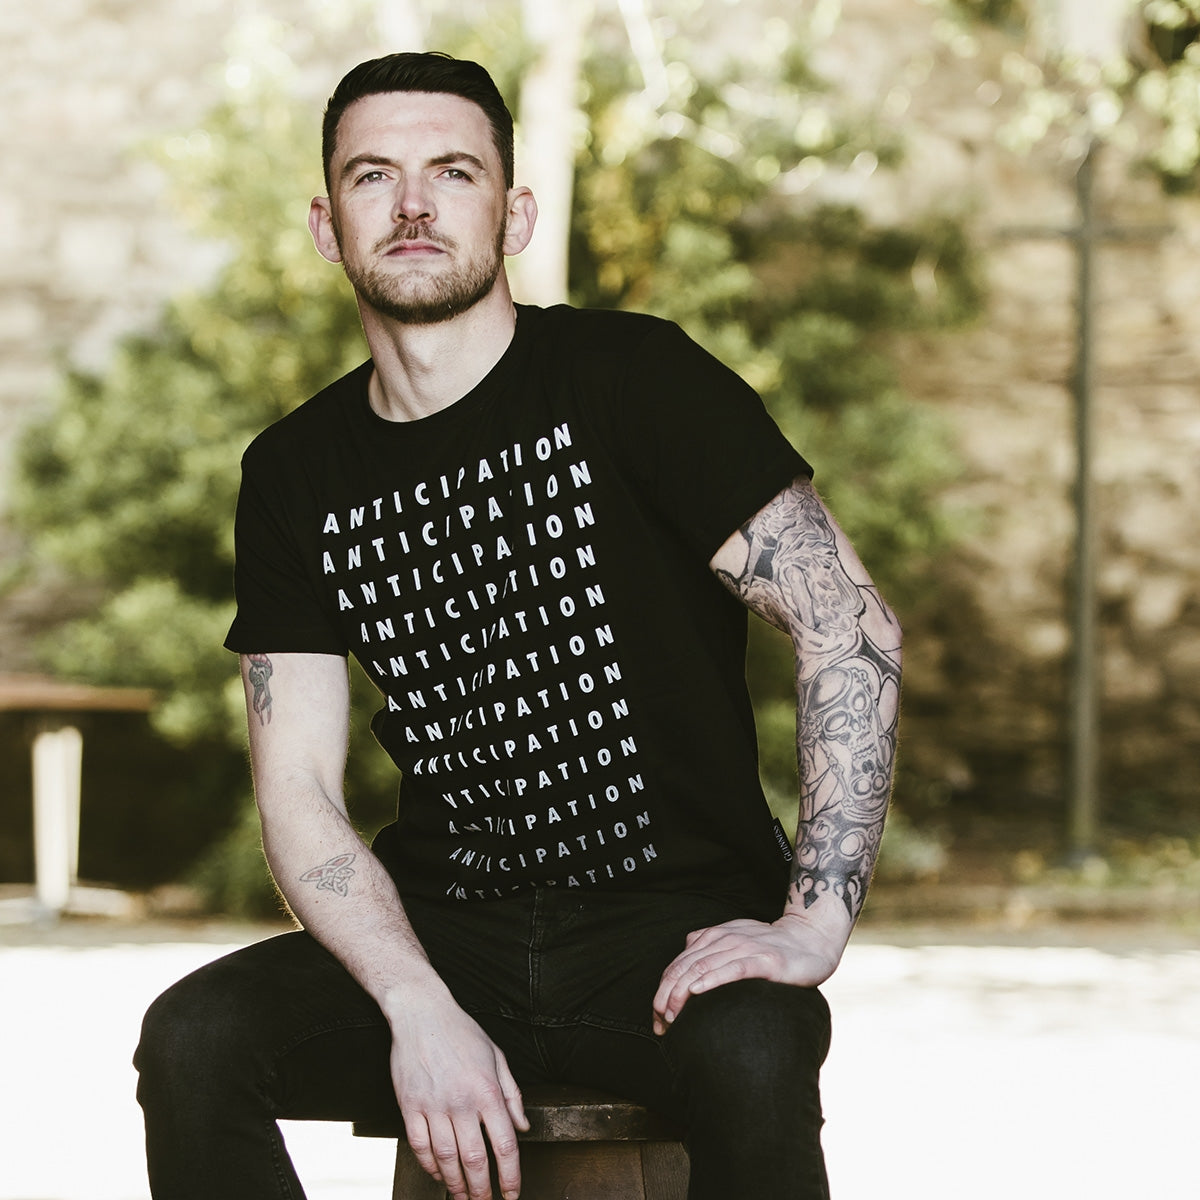 A man sitting on a stool with tattoos, displaying both comfort and style in his Guinness Anticipation Pint tee from Guinness.